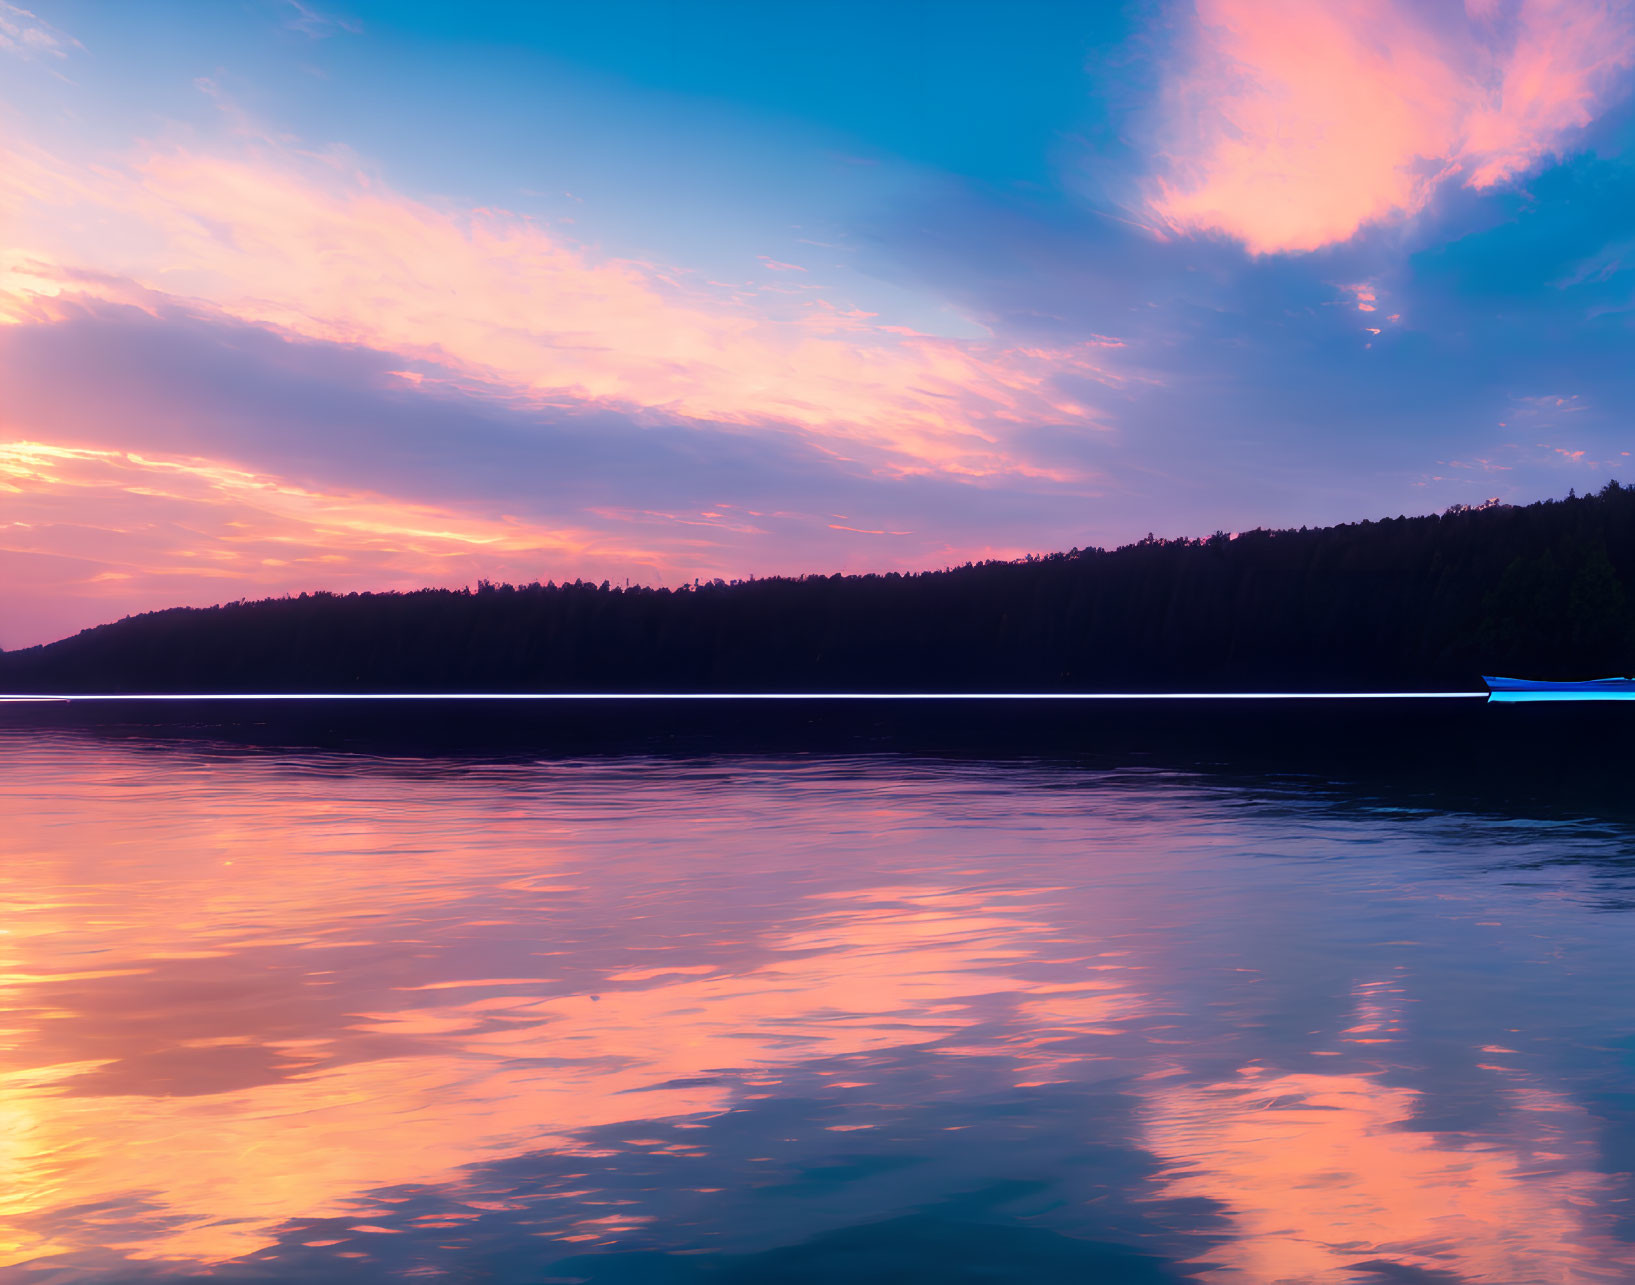 Colorful sunset over calm lake with forested horizon